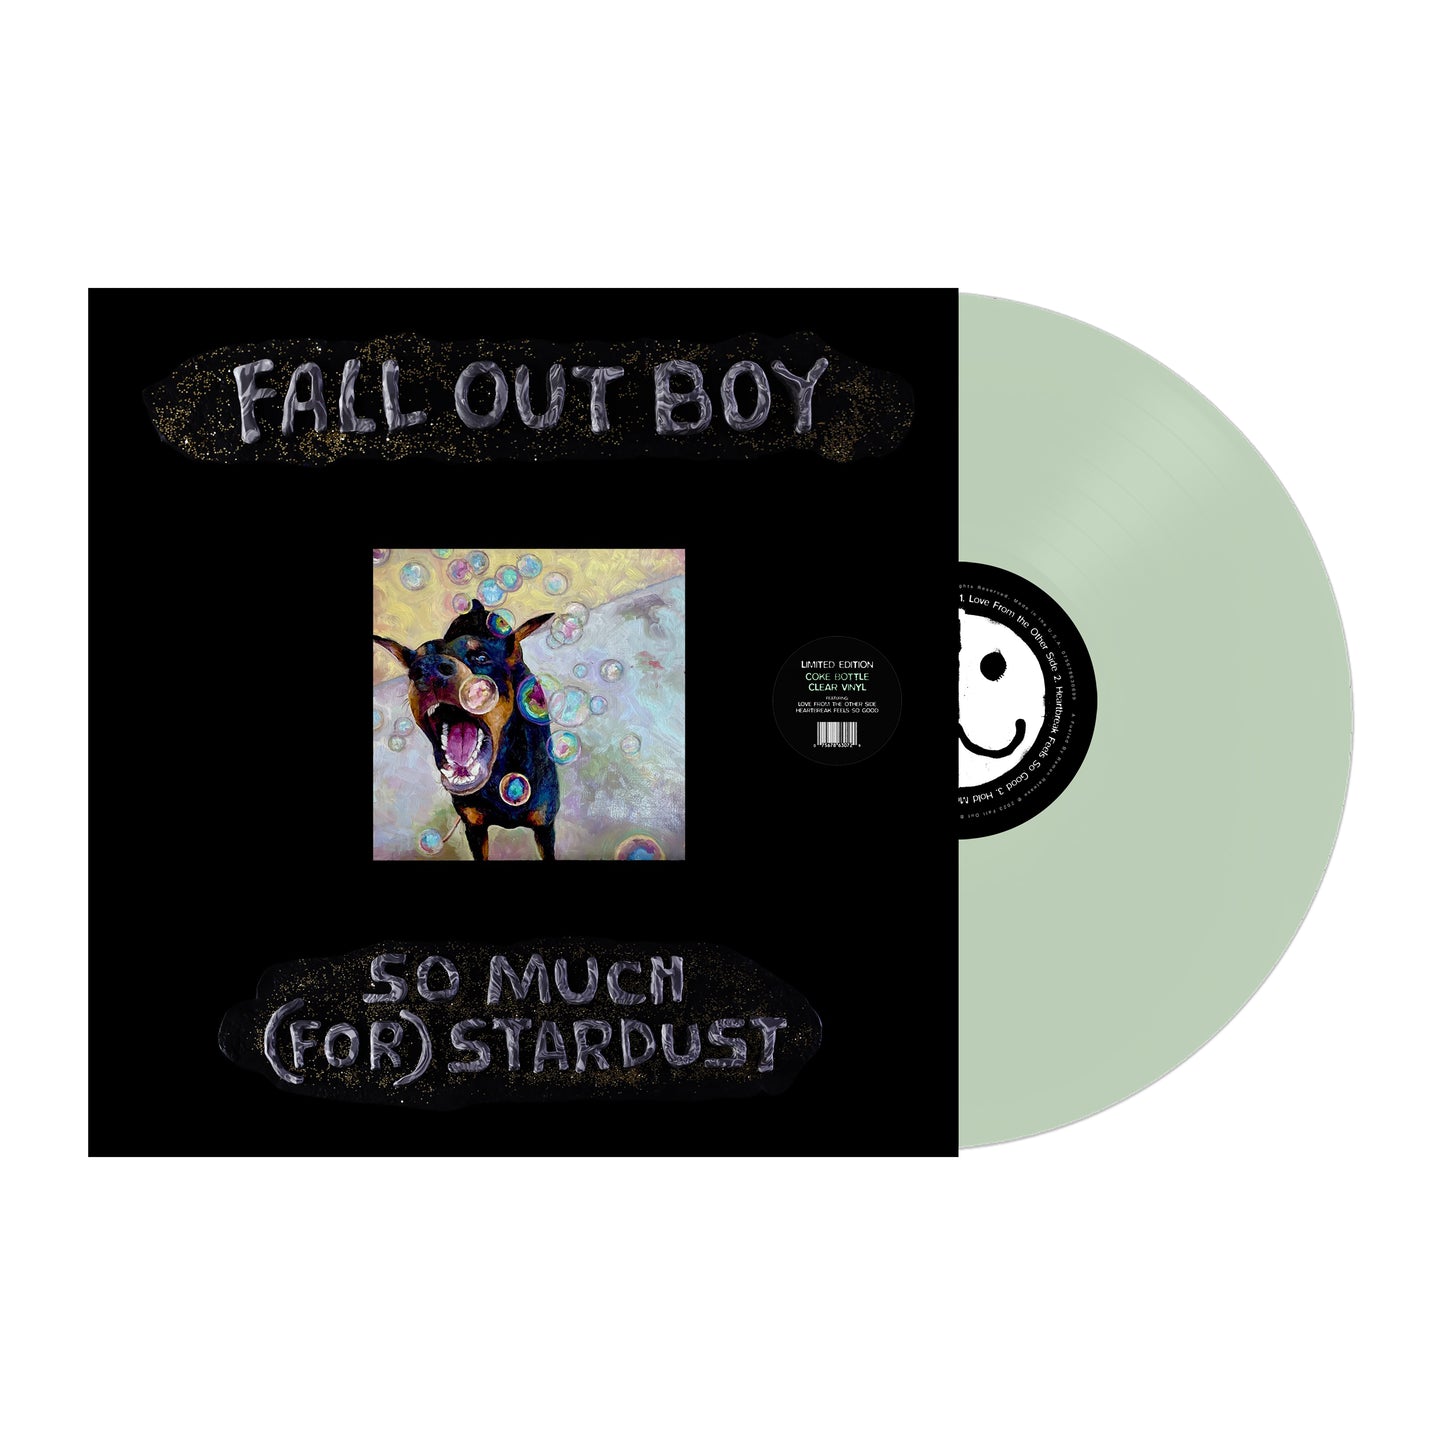 Fall Out Boy "So Much (For) Stardust" LP